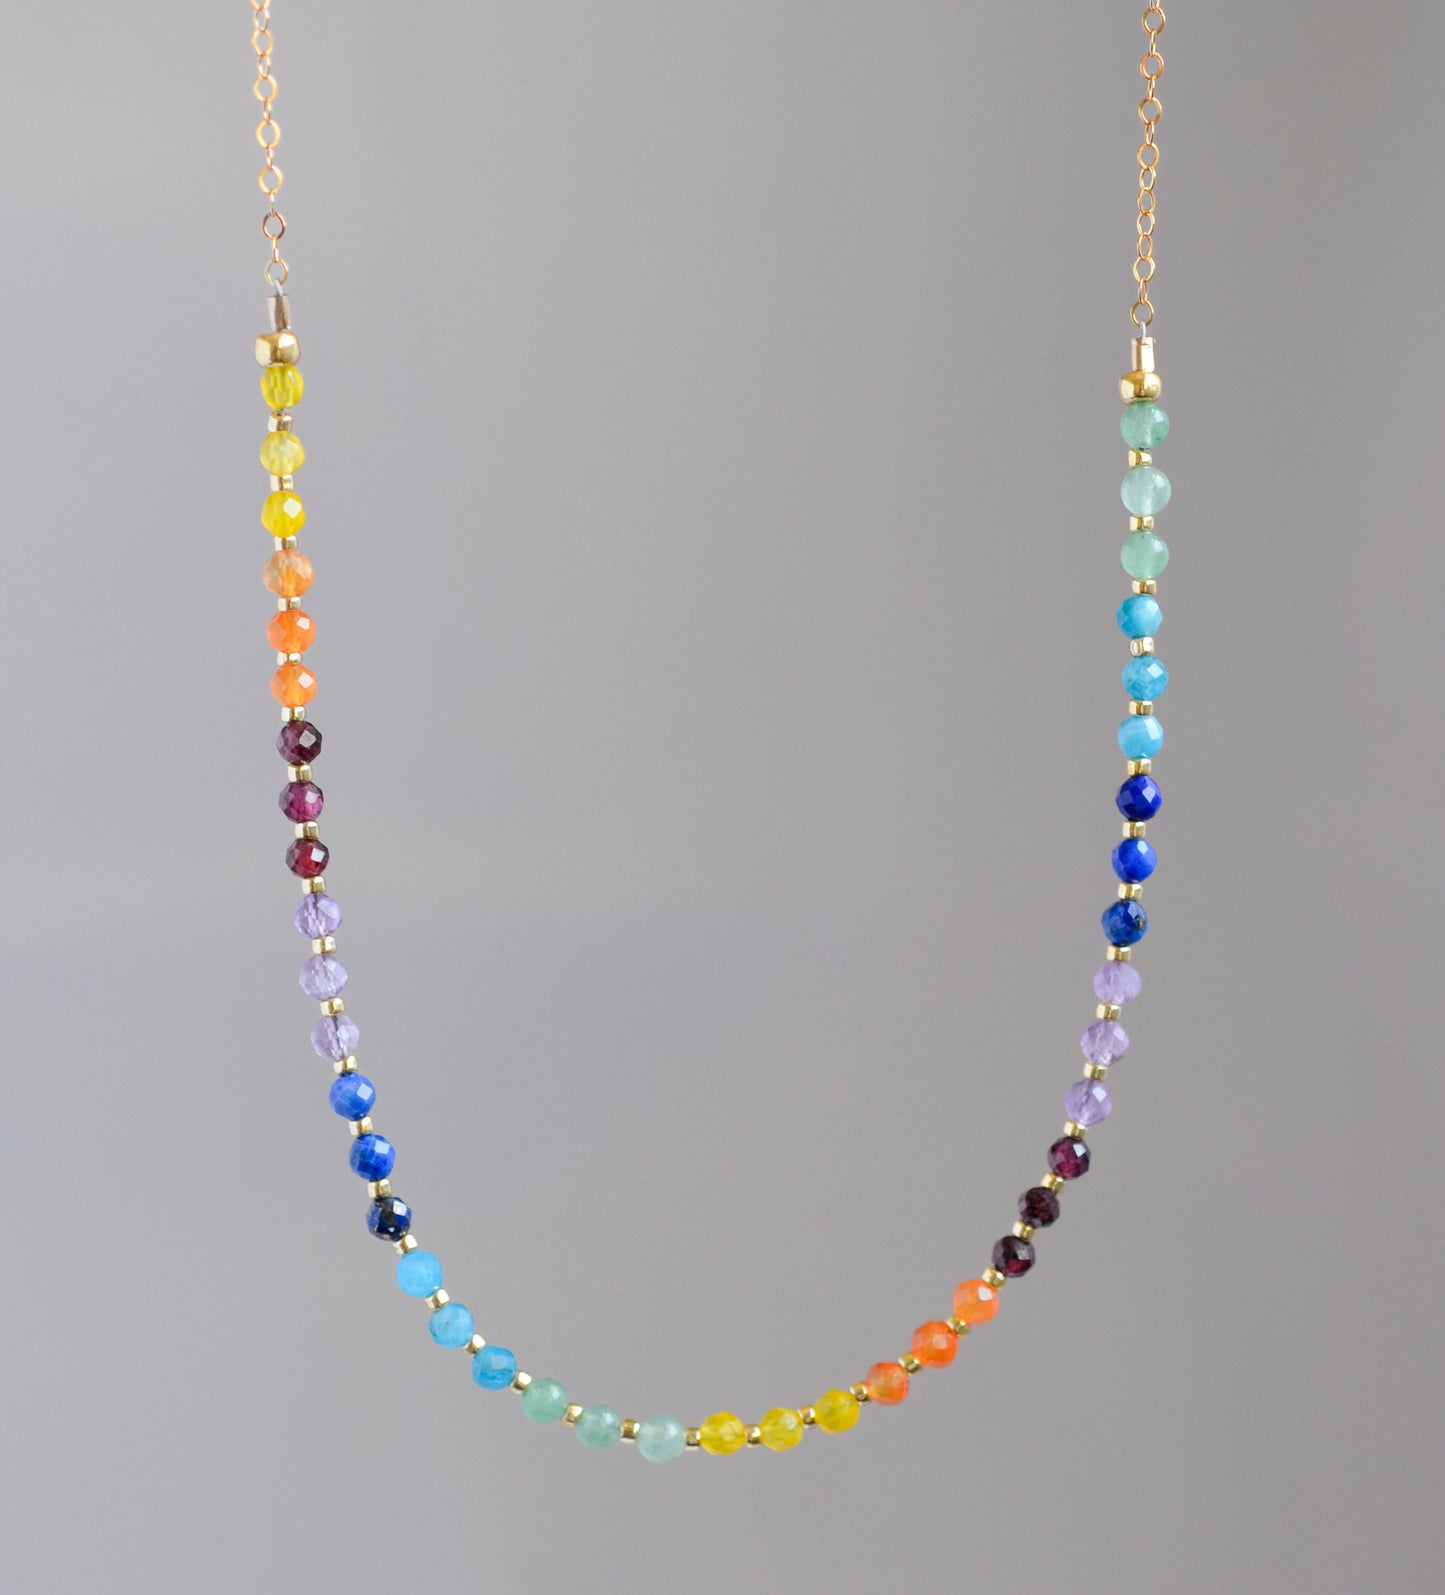 Rainbow chakra gemstone necklace. Crystals are beaded together in this pattern: yellow, orange, red, purple, blue, aqua, green. The gold style is shown.